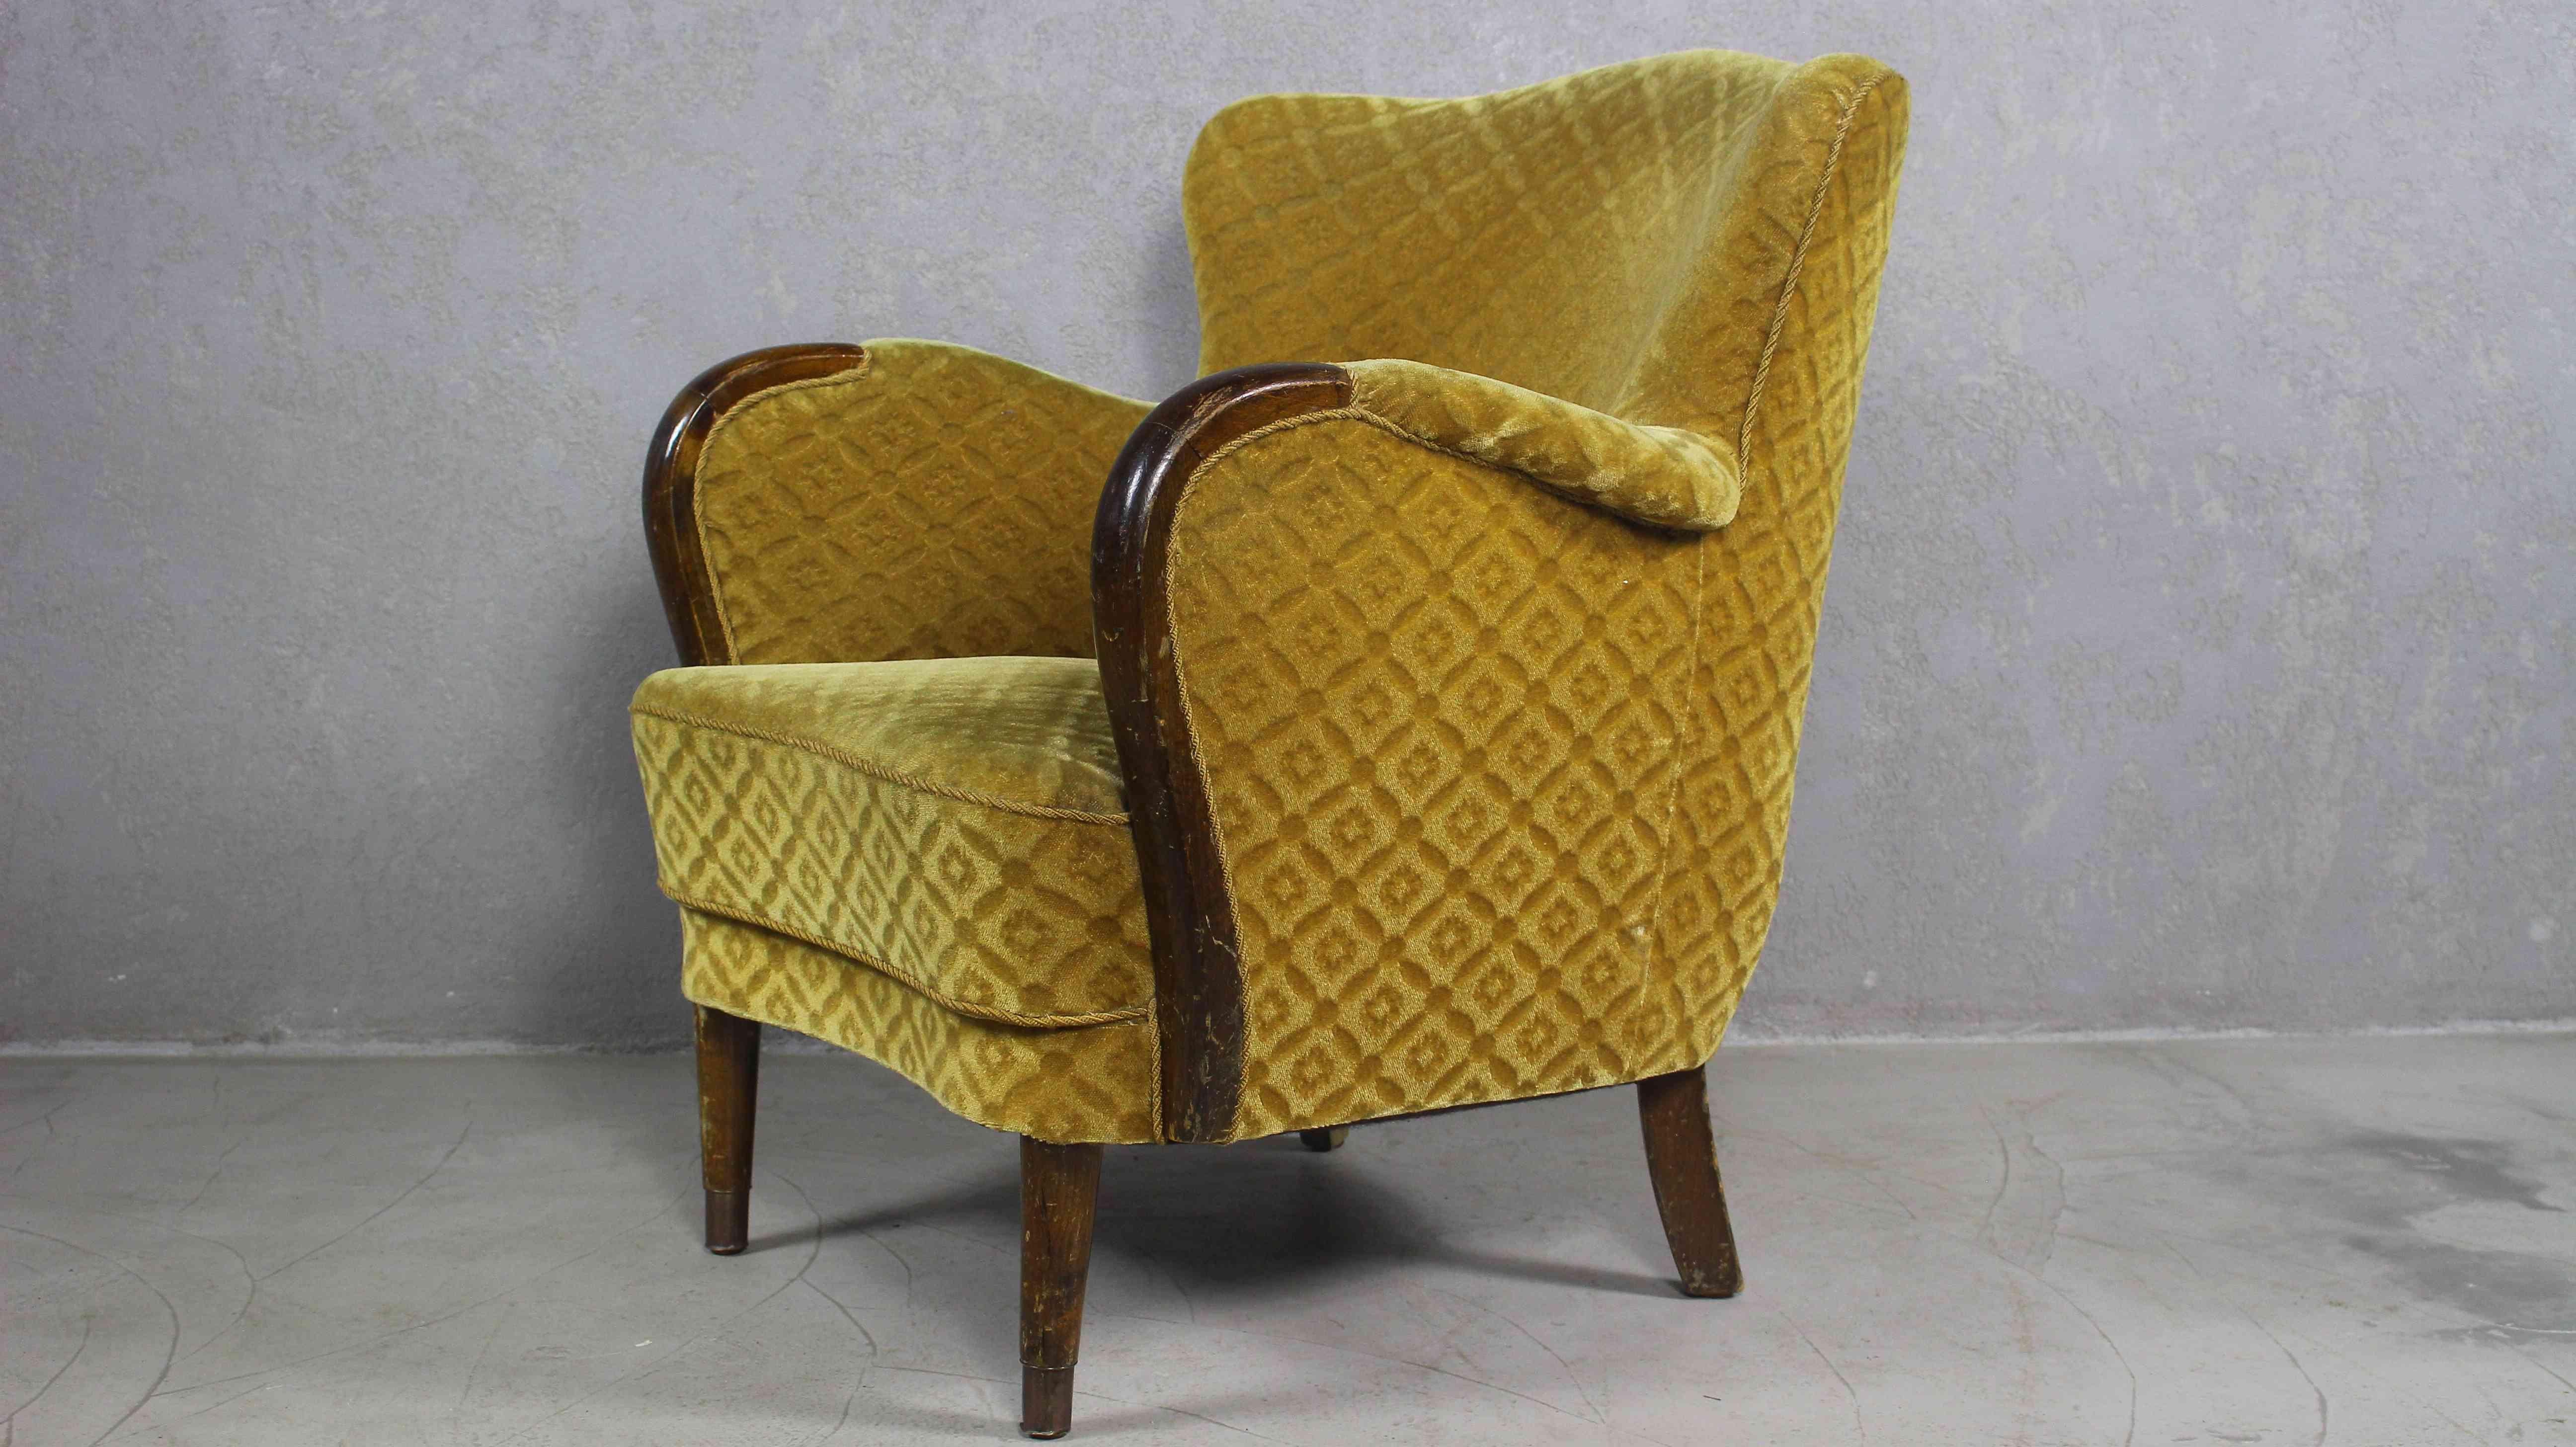 Danish low back chair from 1950s.
Wooden armrest and turned legs with brass feets.
Requires reupholstery.